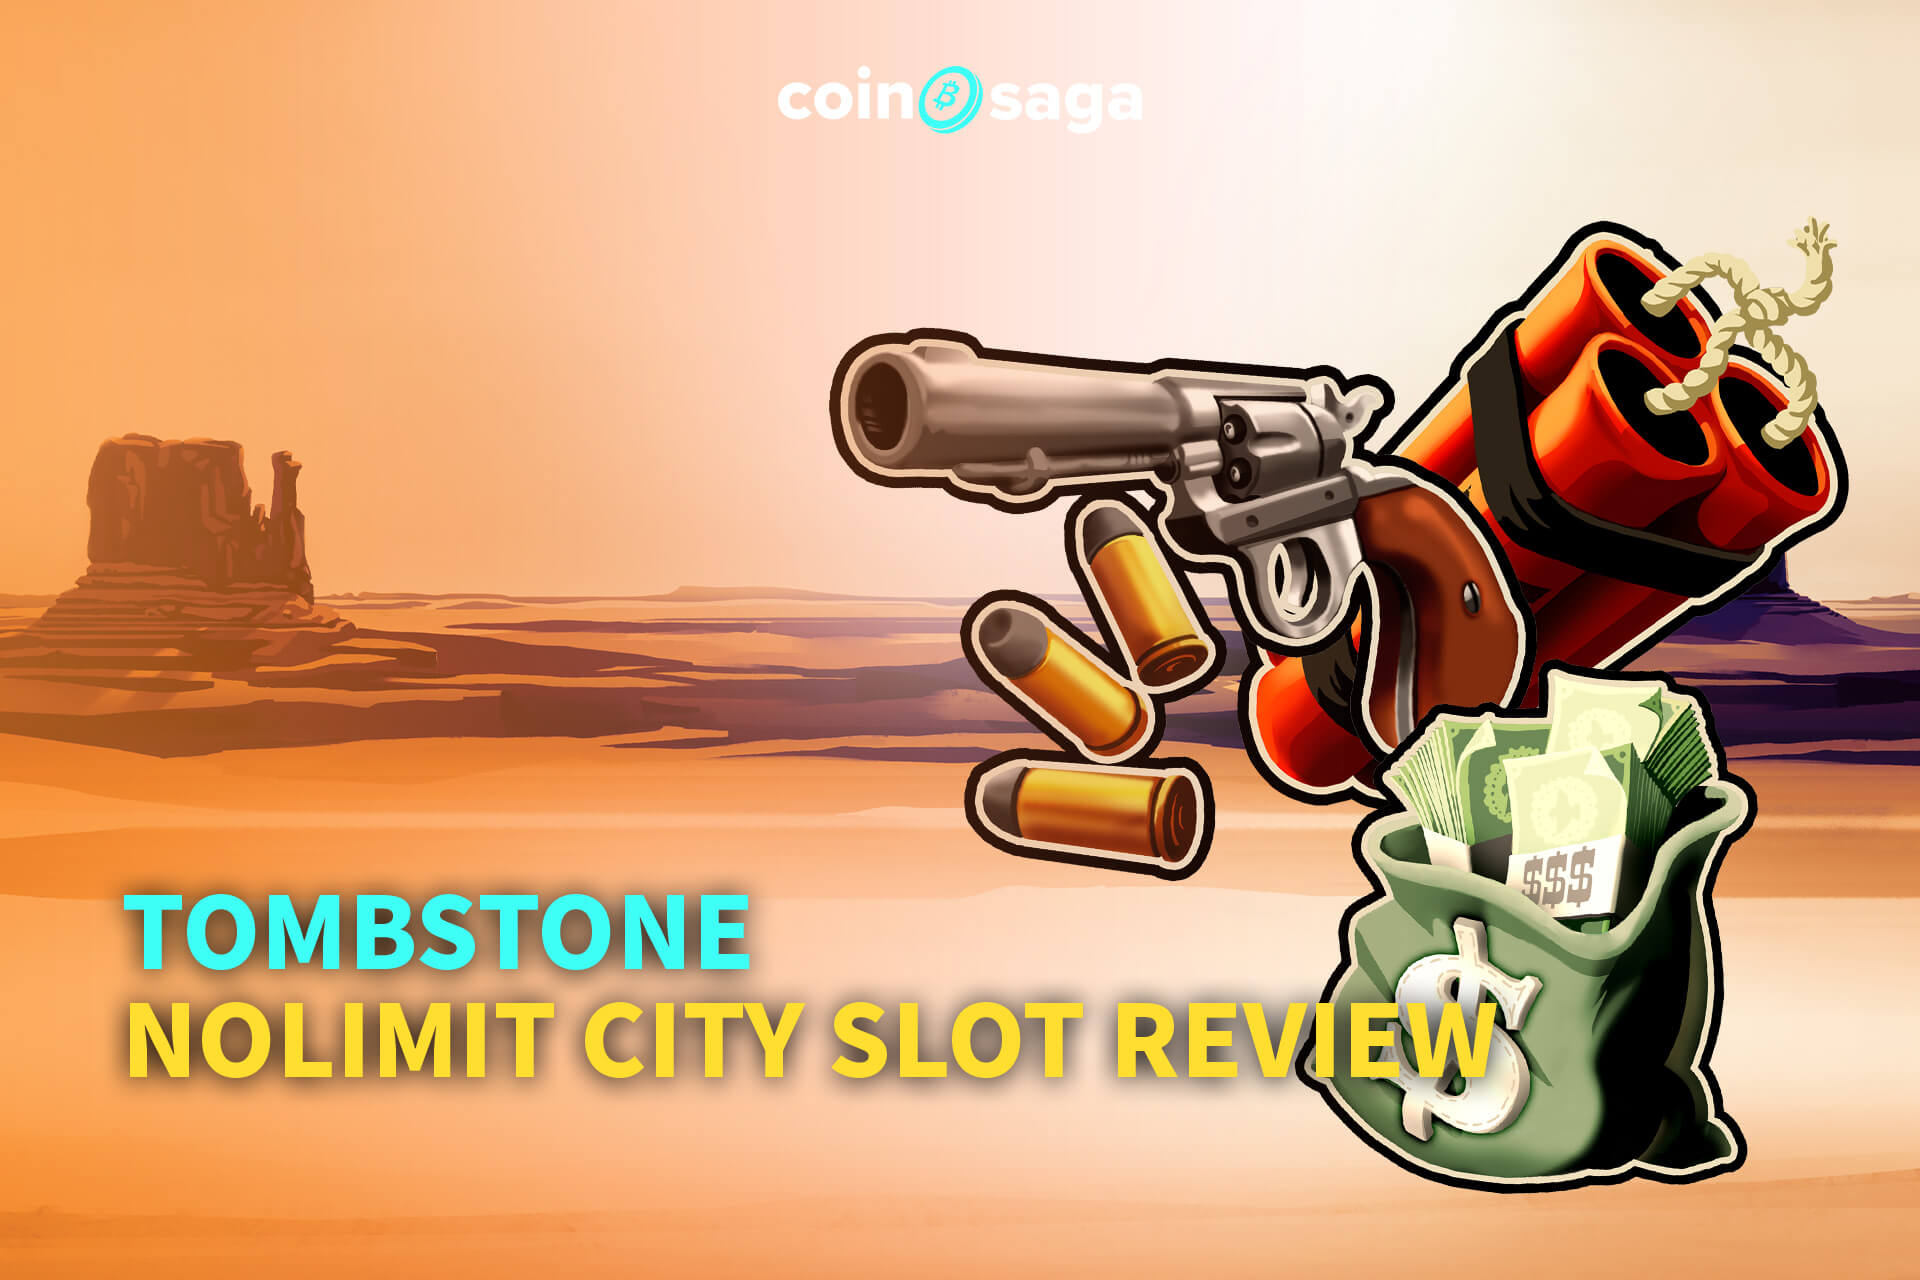 Tombstone Slot Review